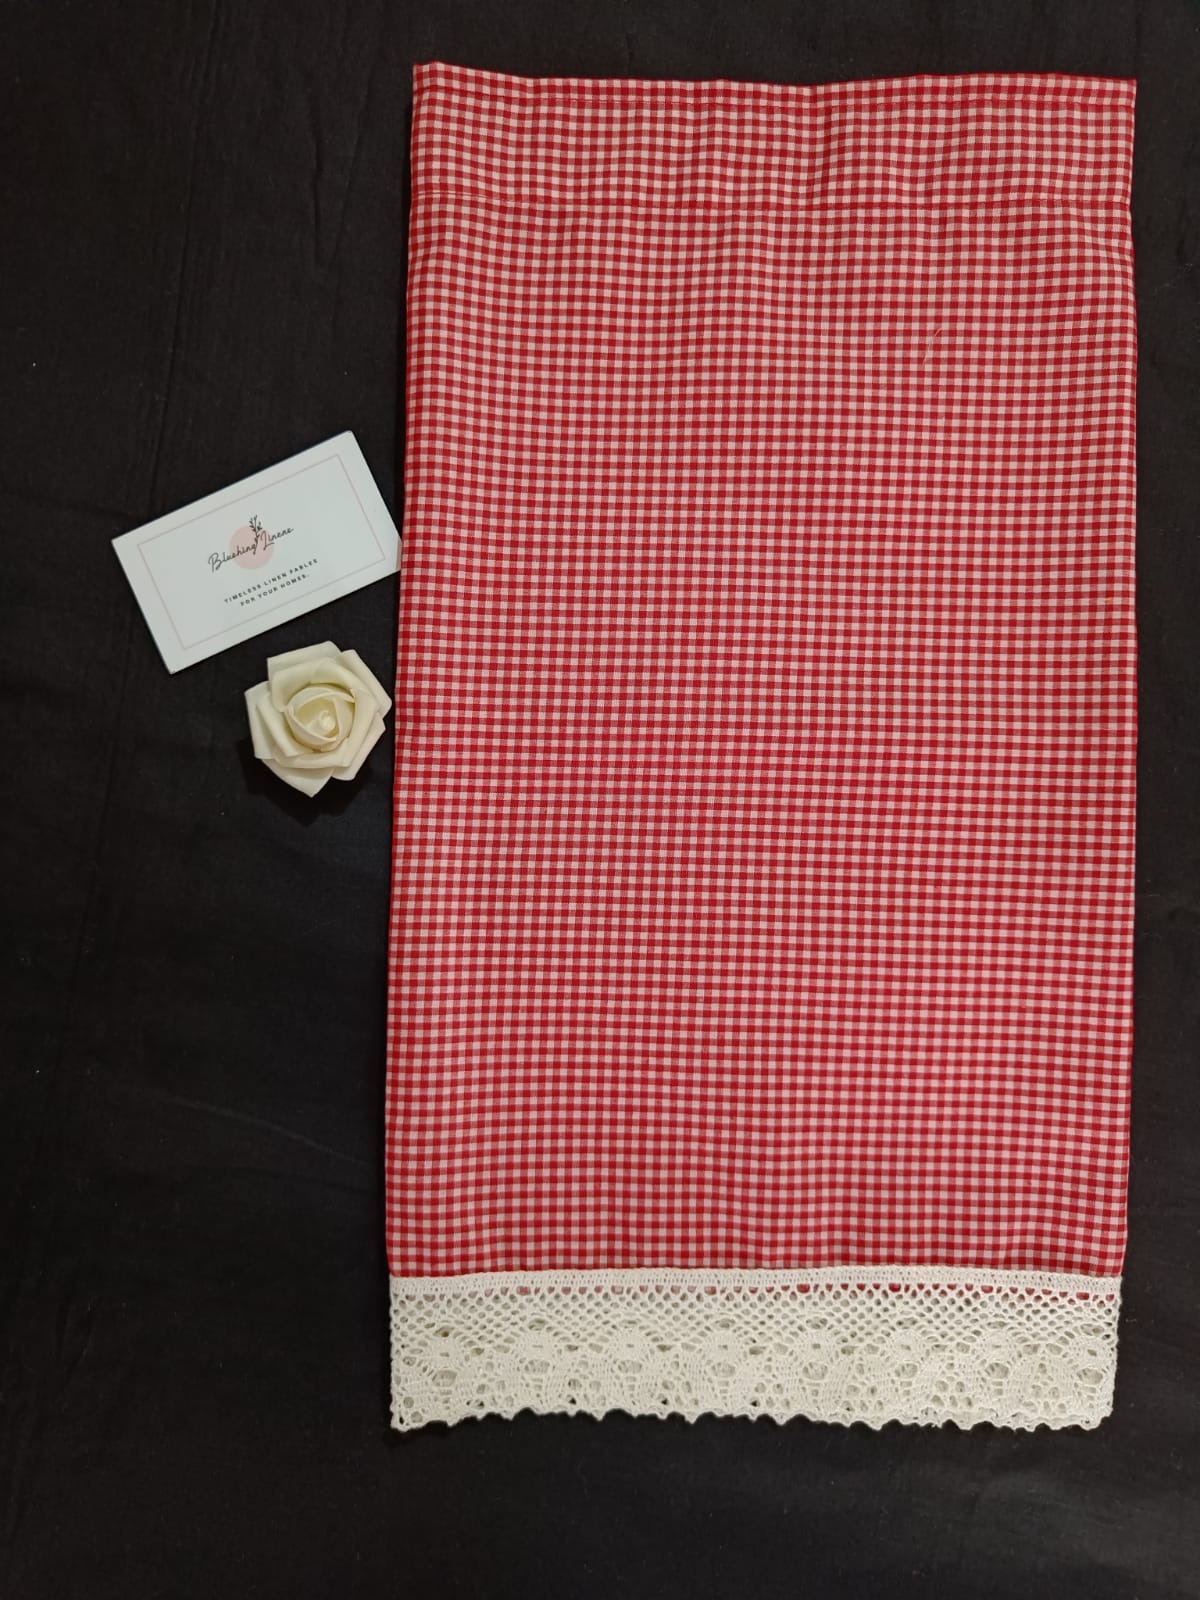 Red gingham print Valance with white lace